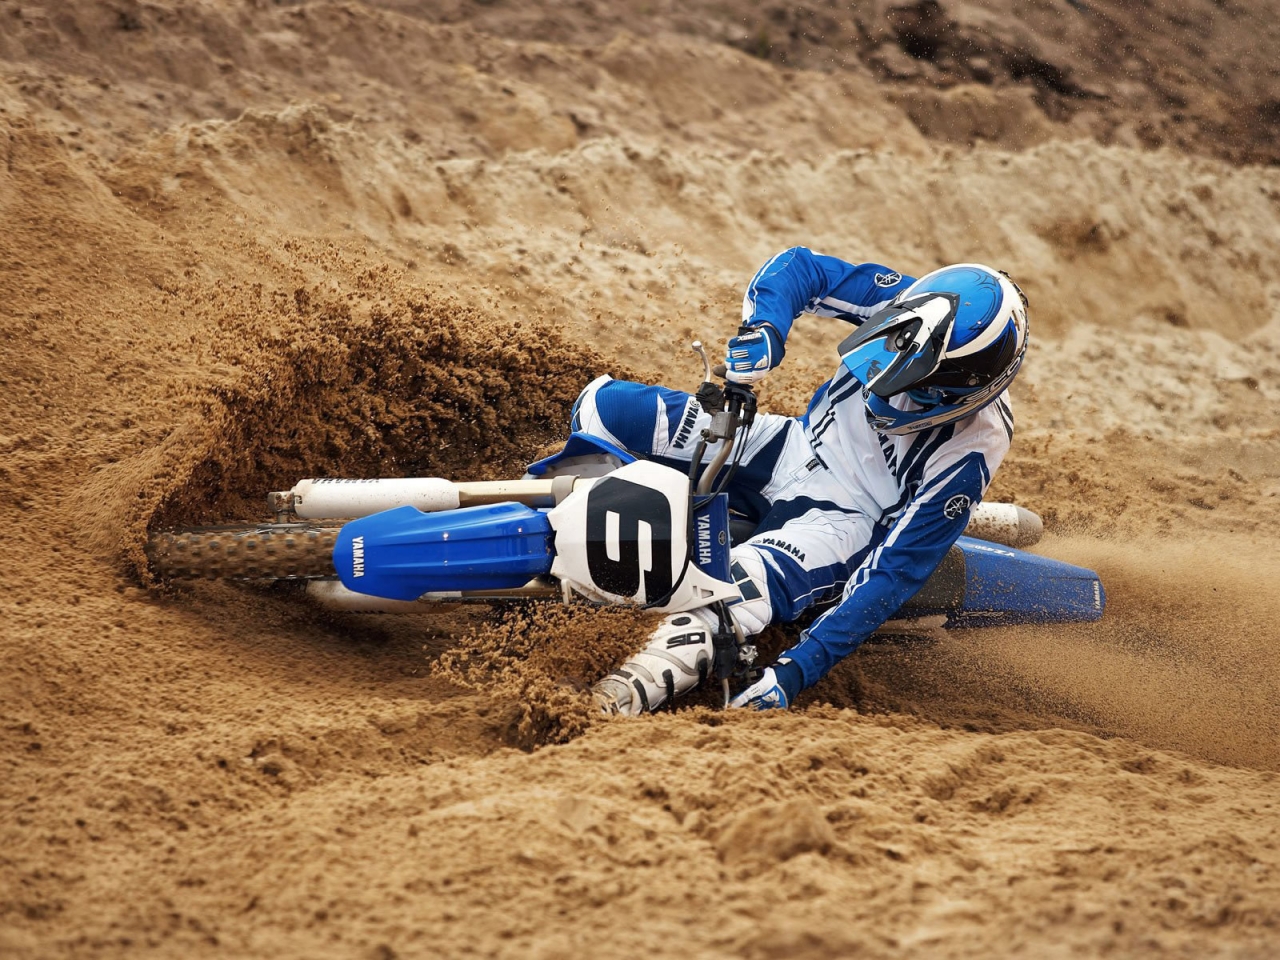 Extreme Moto Race for 1280 x 960 resolution